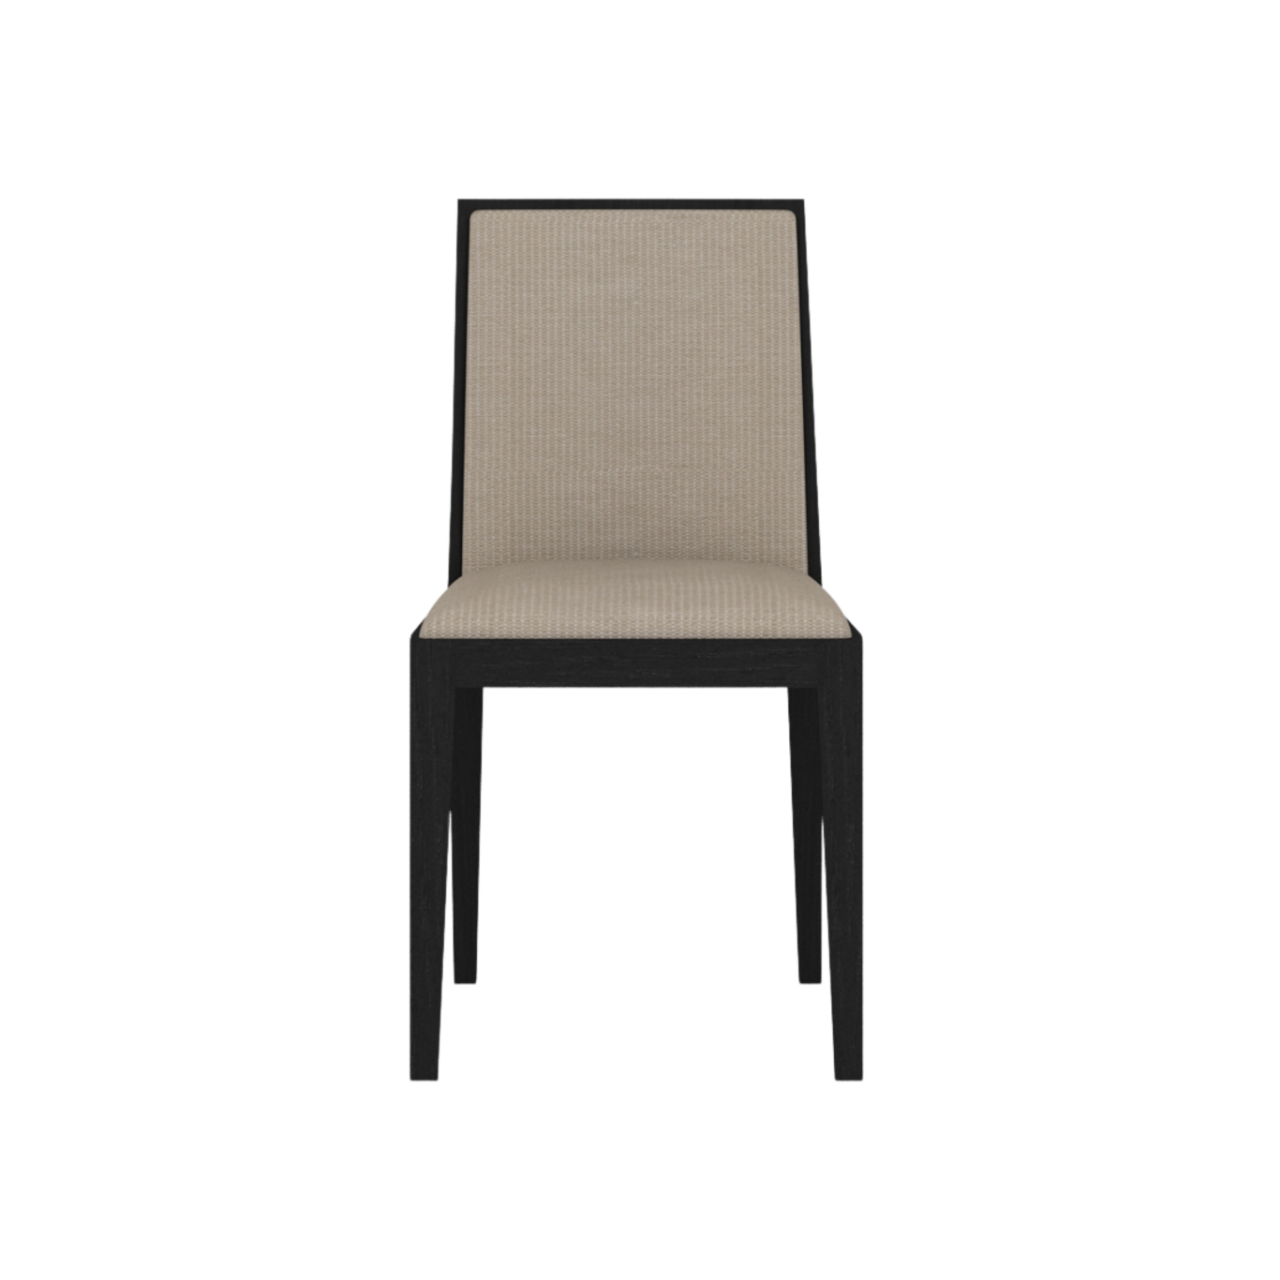 Modern minimal wooden dining chair with contrasting upholstered seat and back